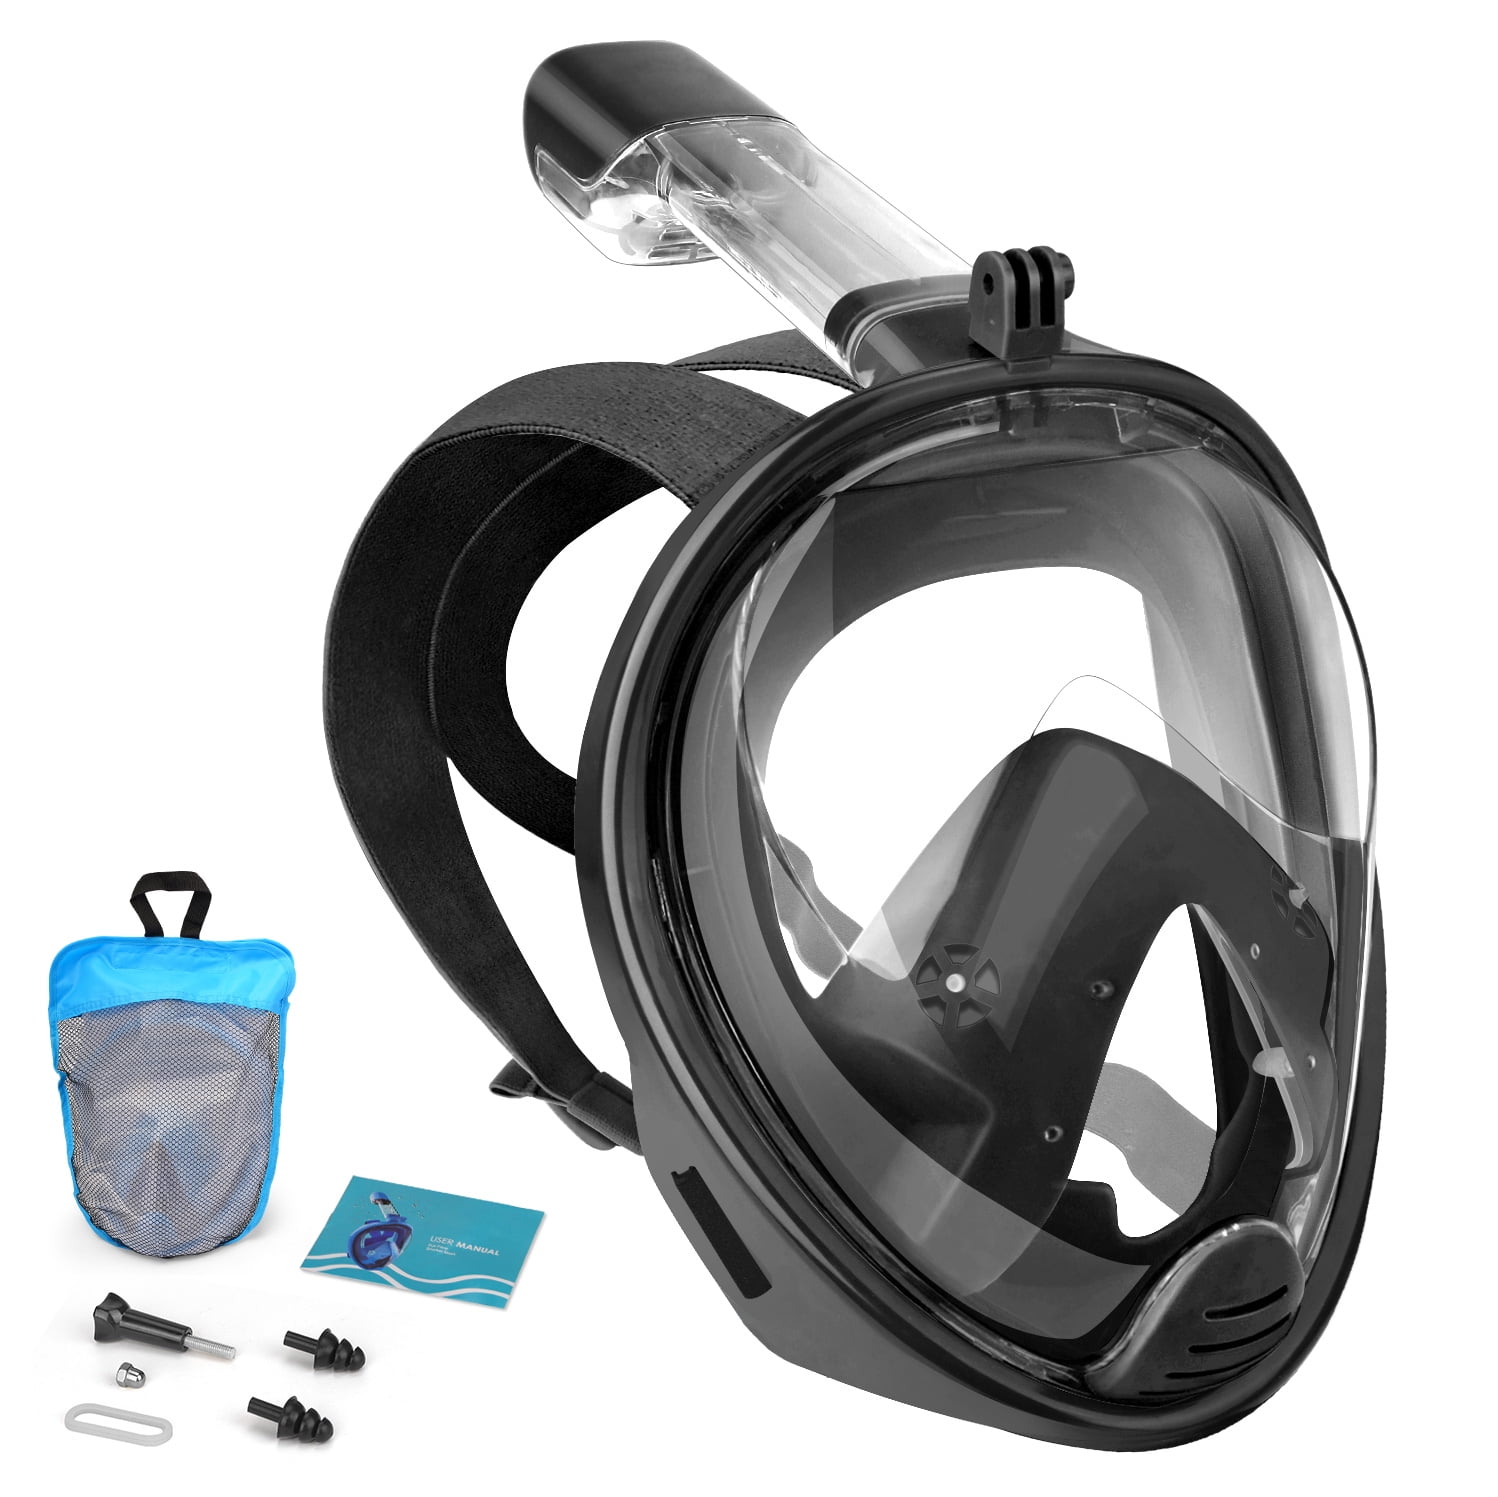 Full Face Snorkel Mask, Snorkeling Mask with Camera Mount, Panoramic View Upgraded Dive Mask with Breathing System, Dry Top Set L/XL - Walmart.com